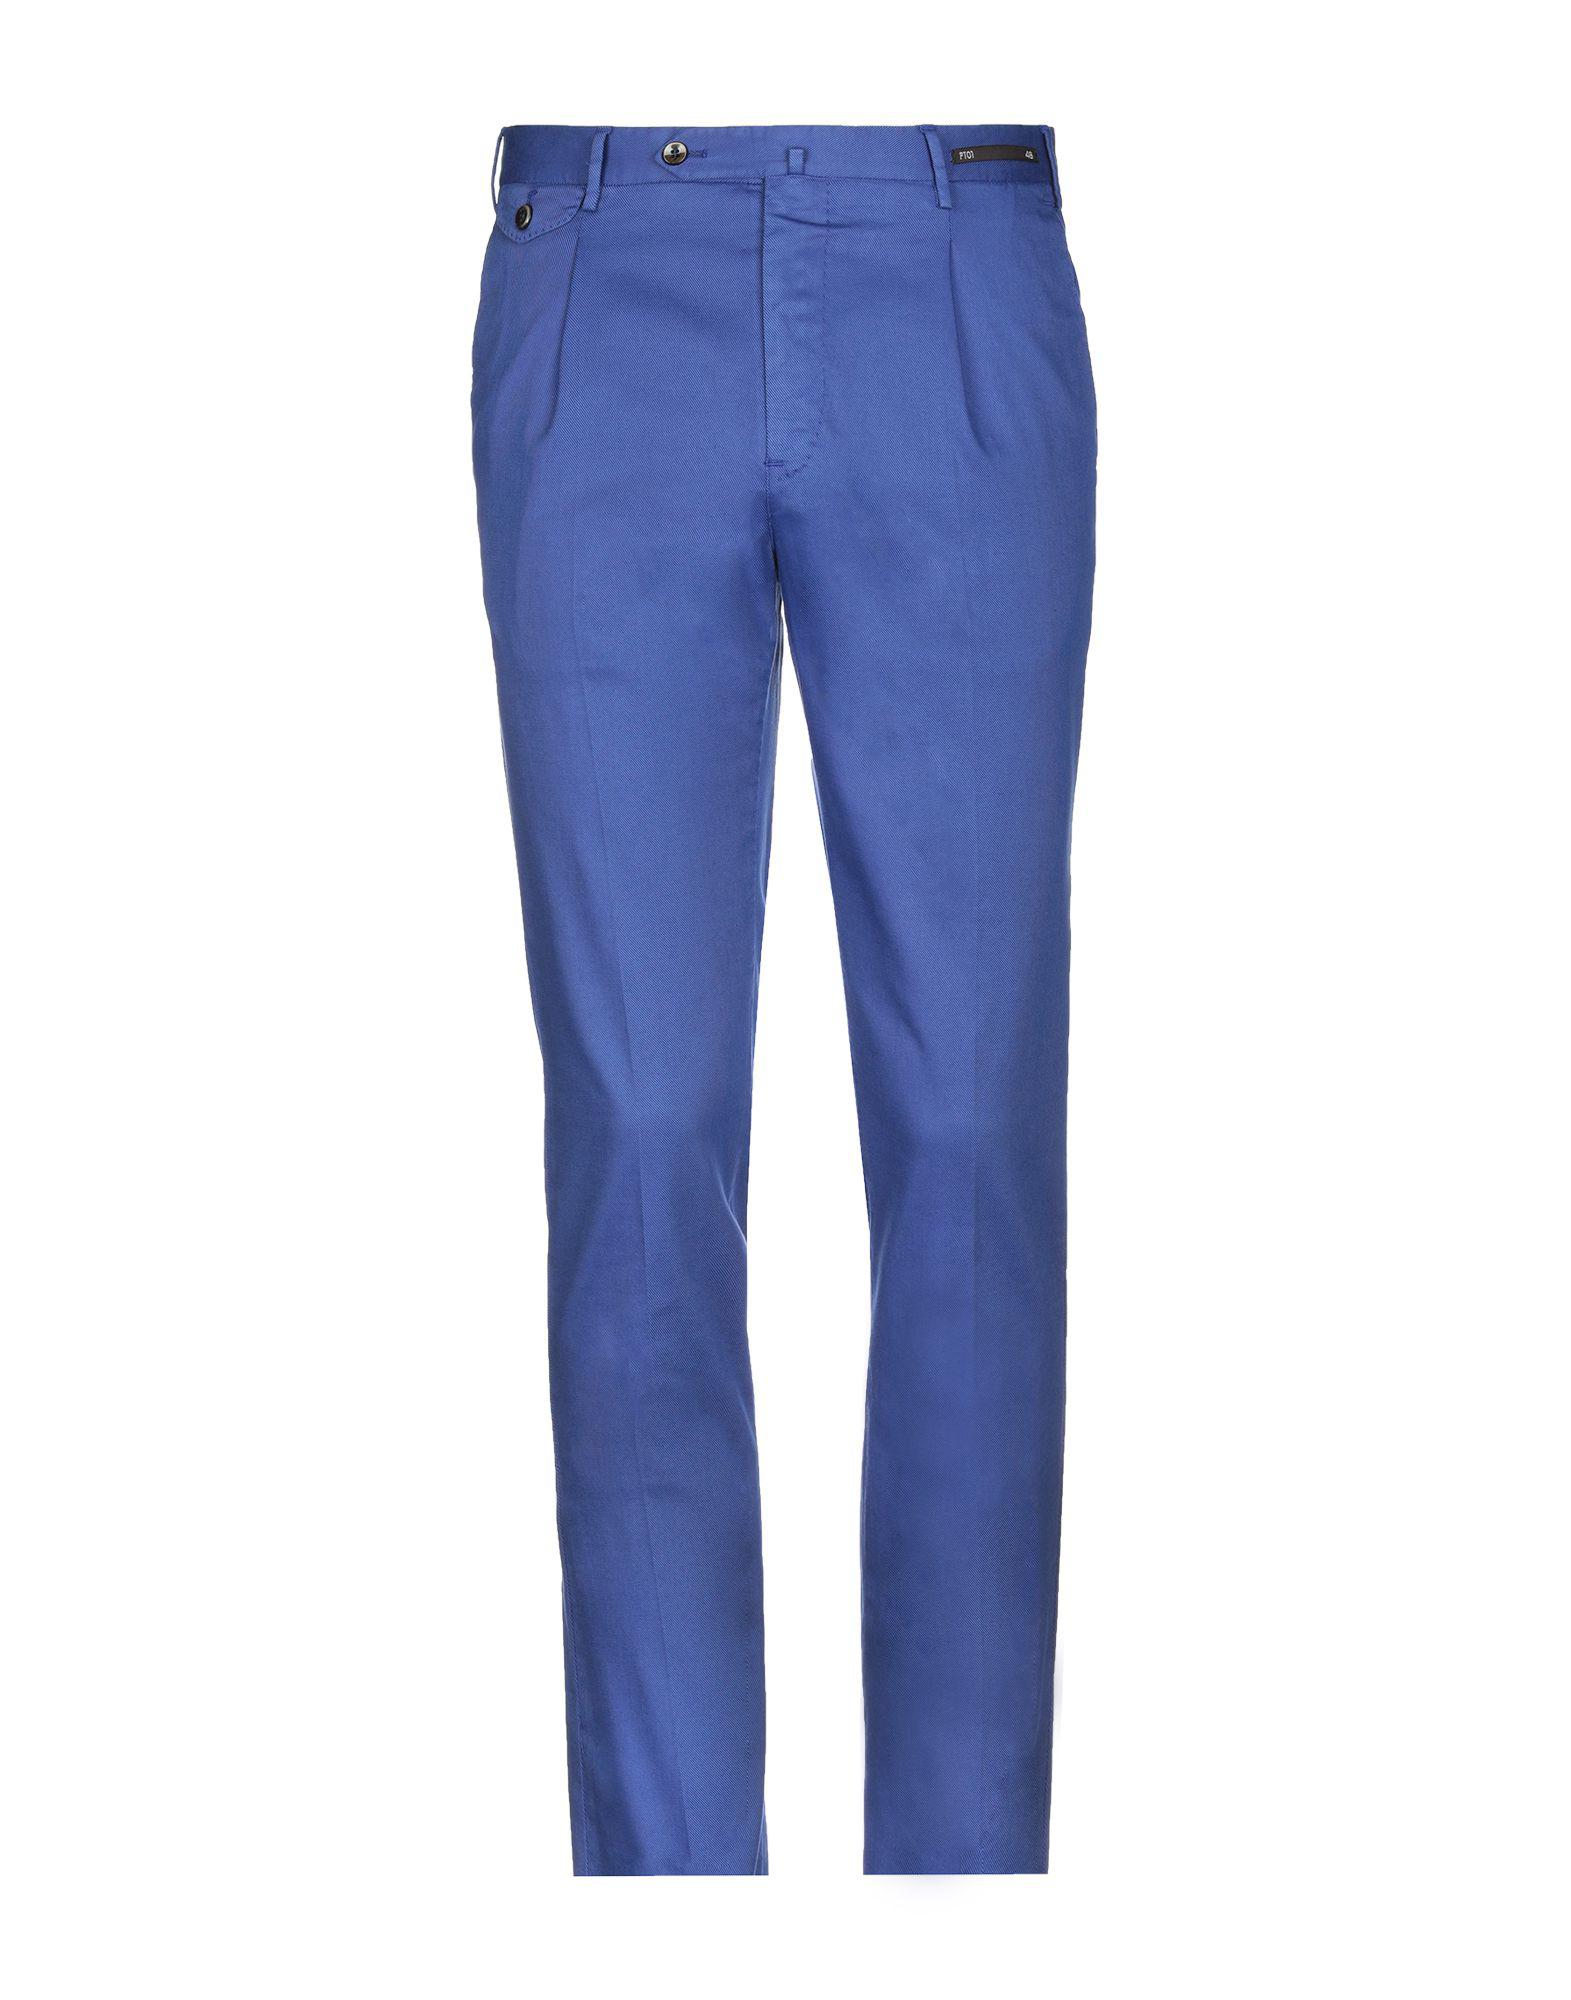 PT01 Cotton Casual Pants in Bright Blue (Blue) for Men - Lyst